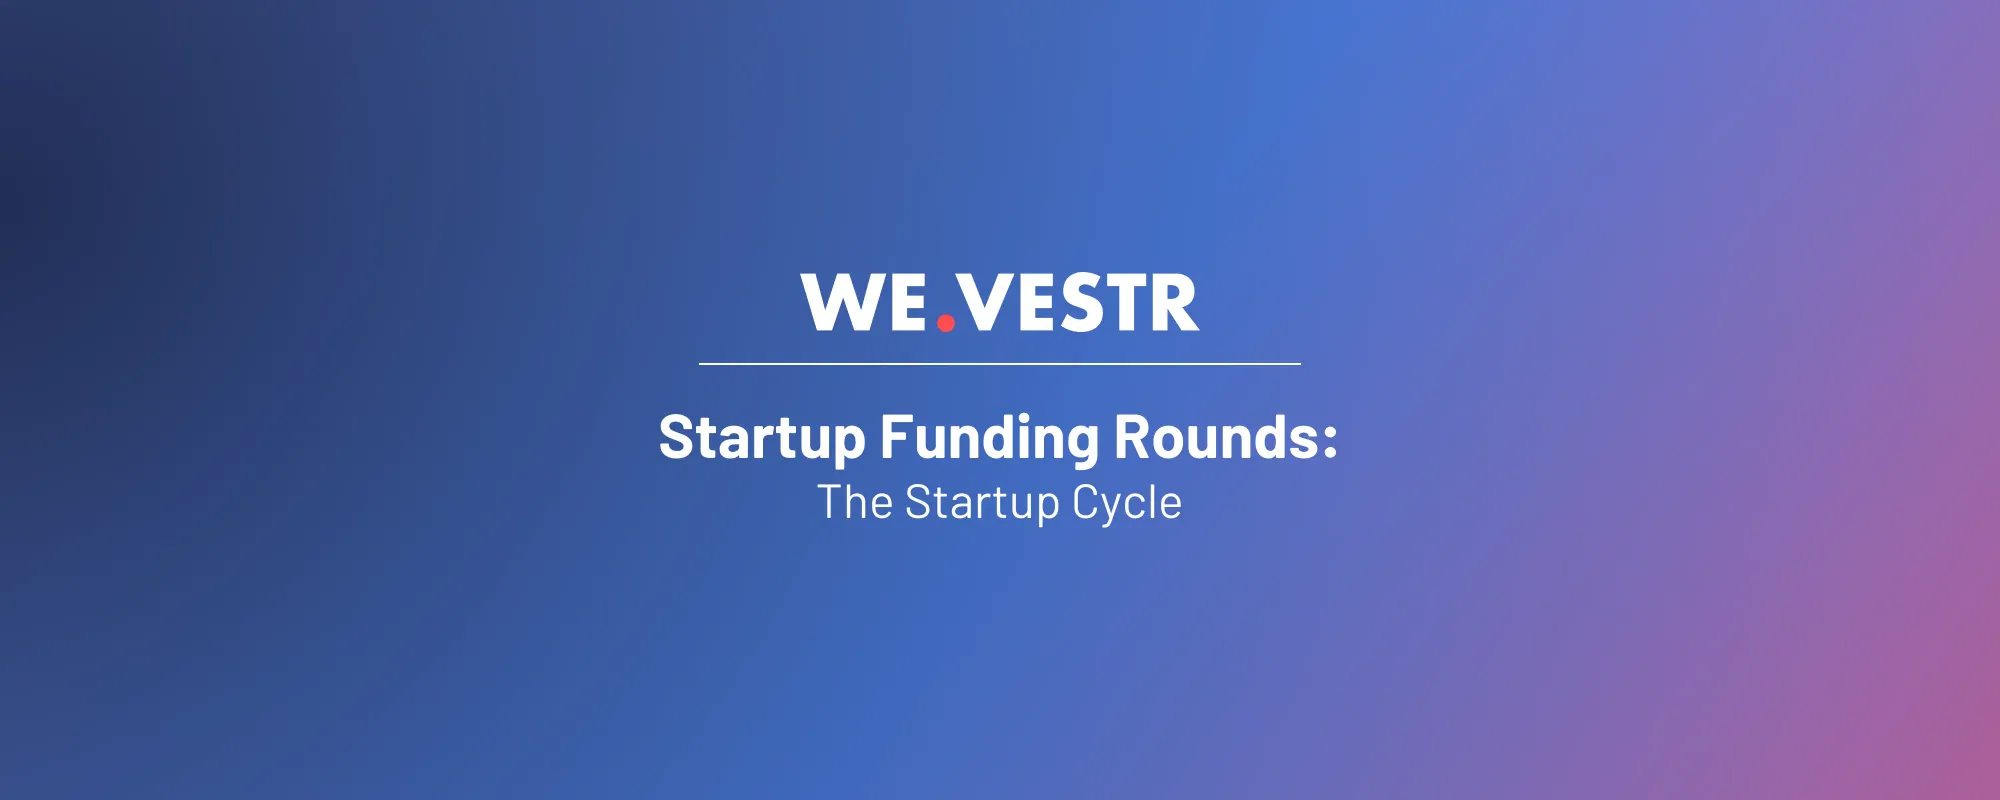 Startup funding rounds explained